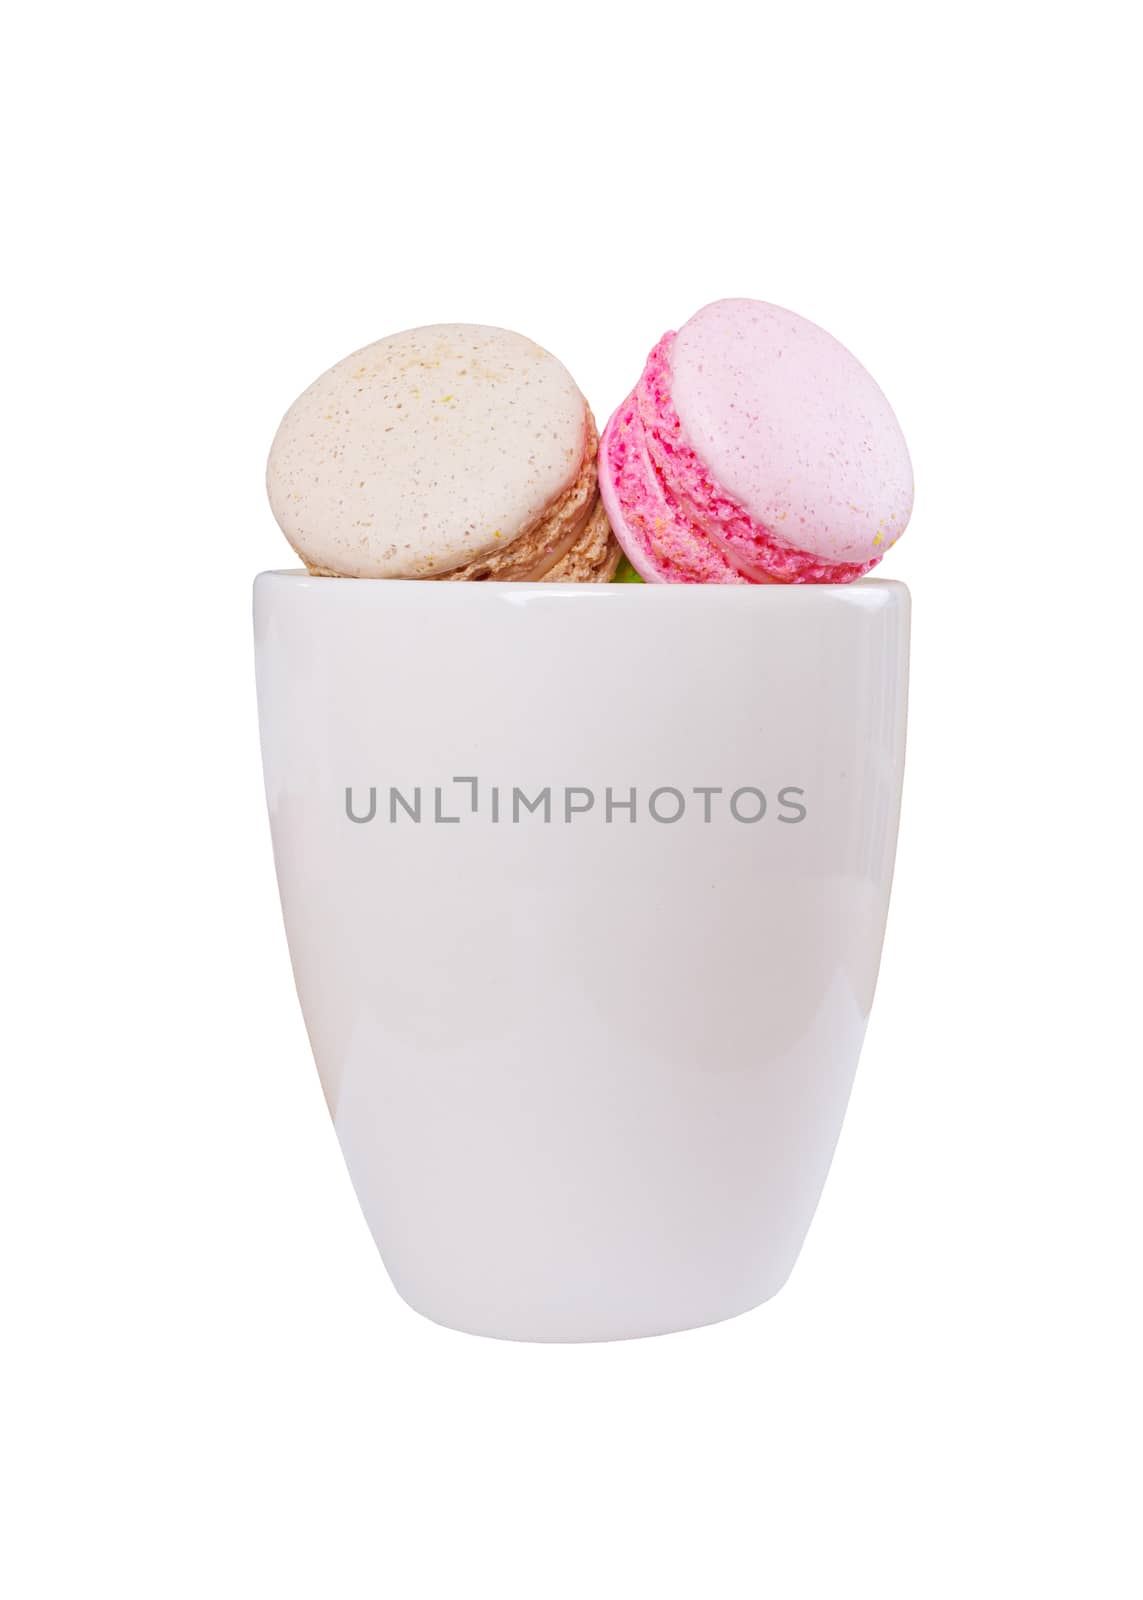 traditional french colorful sweet Macaron in cup on white background